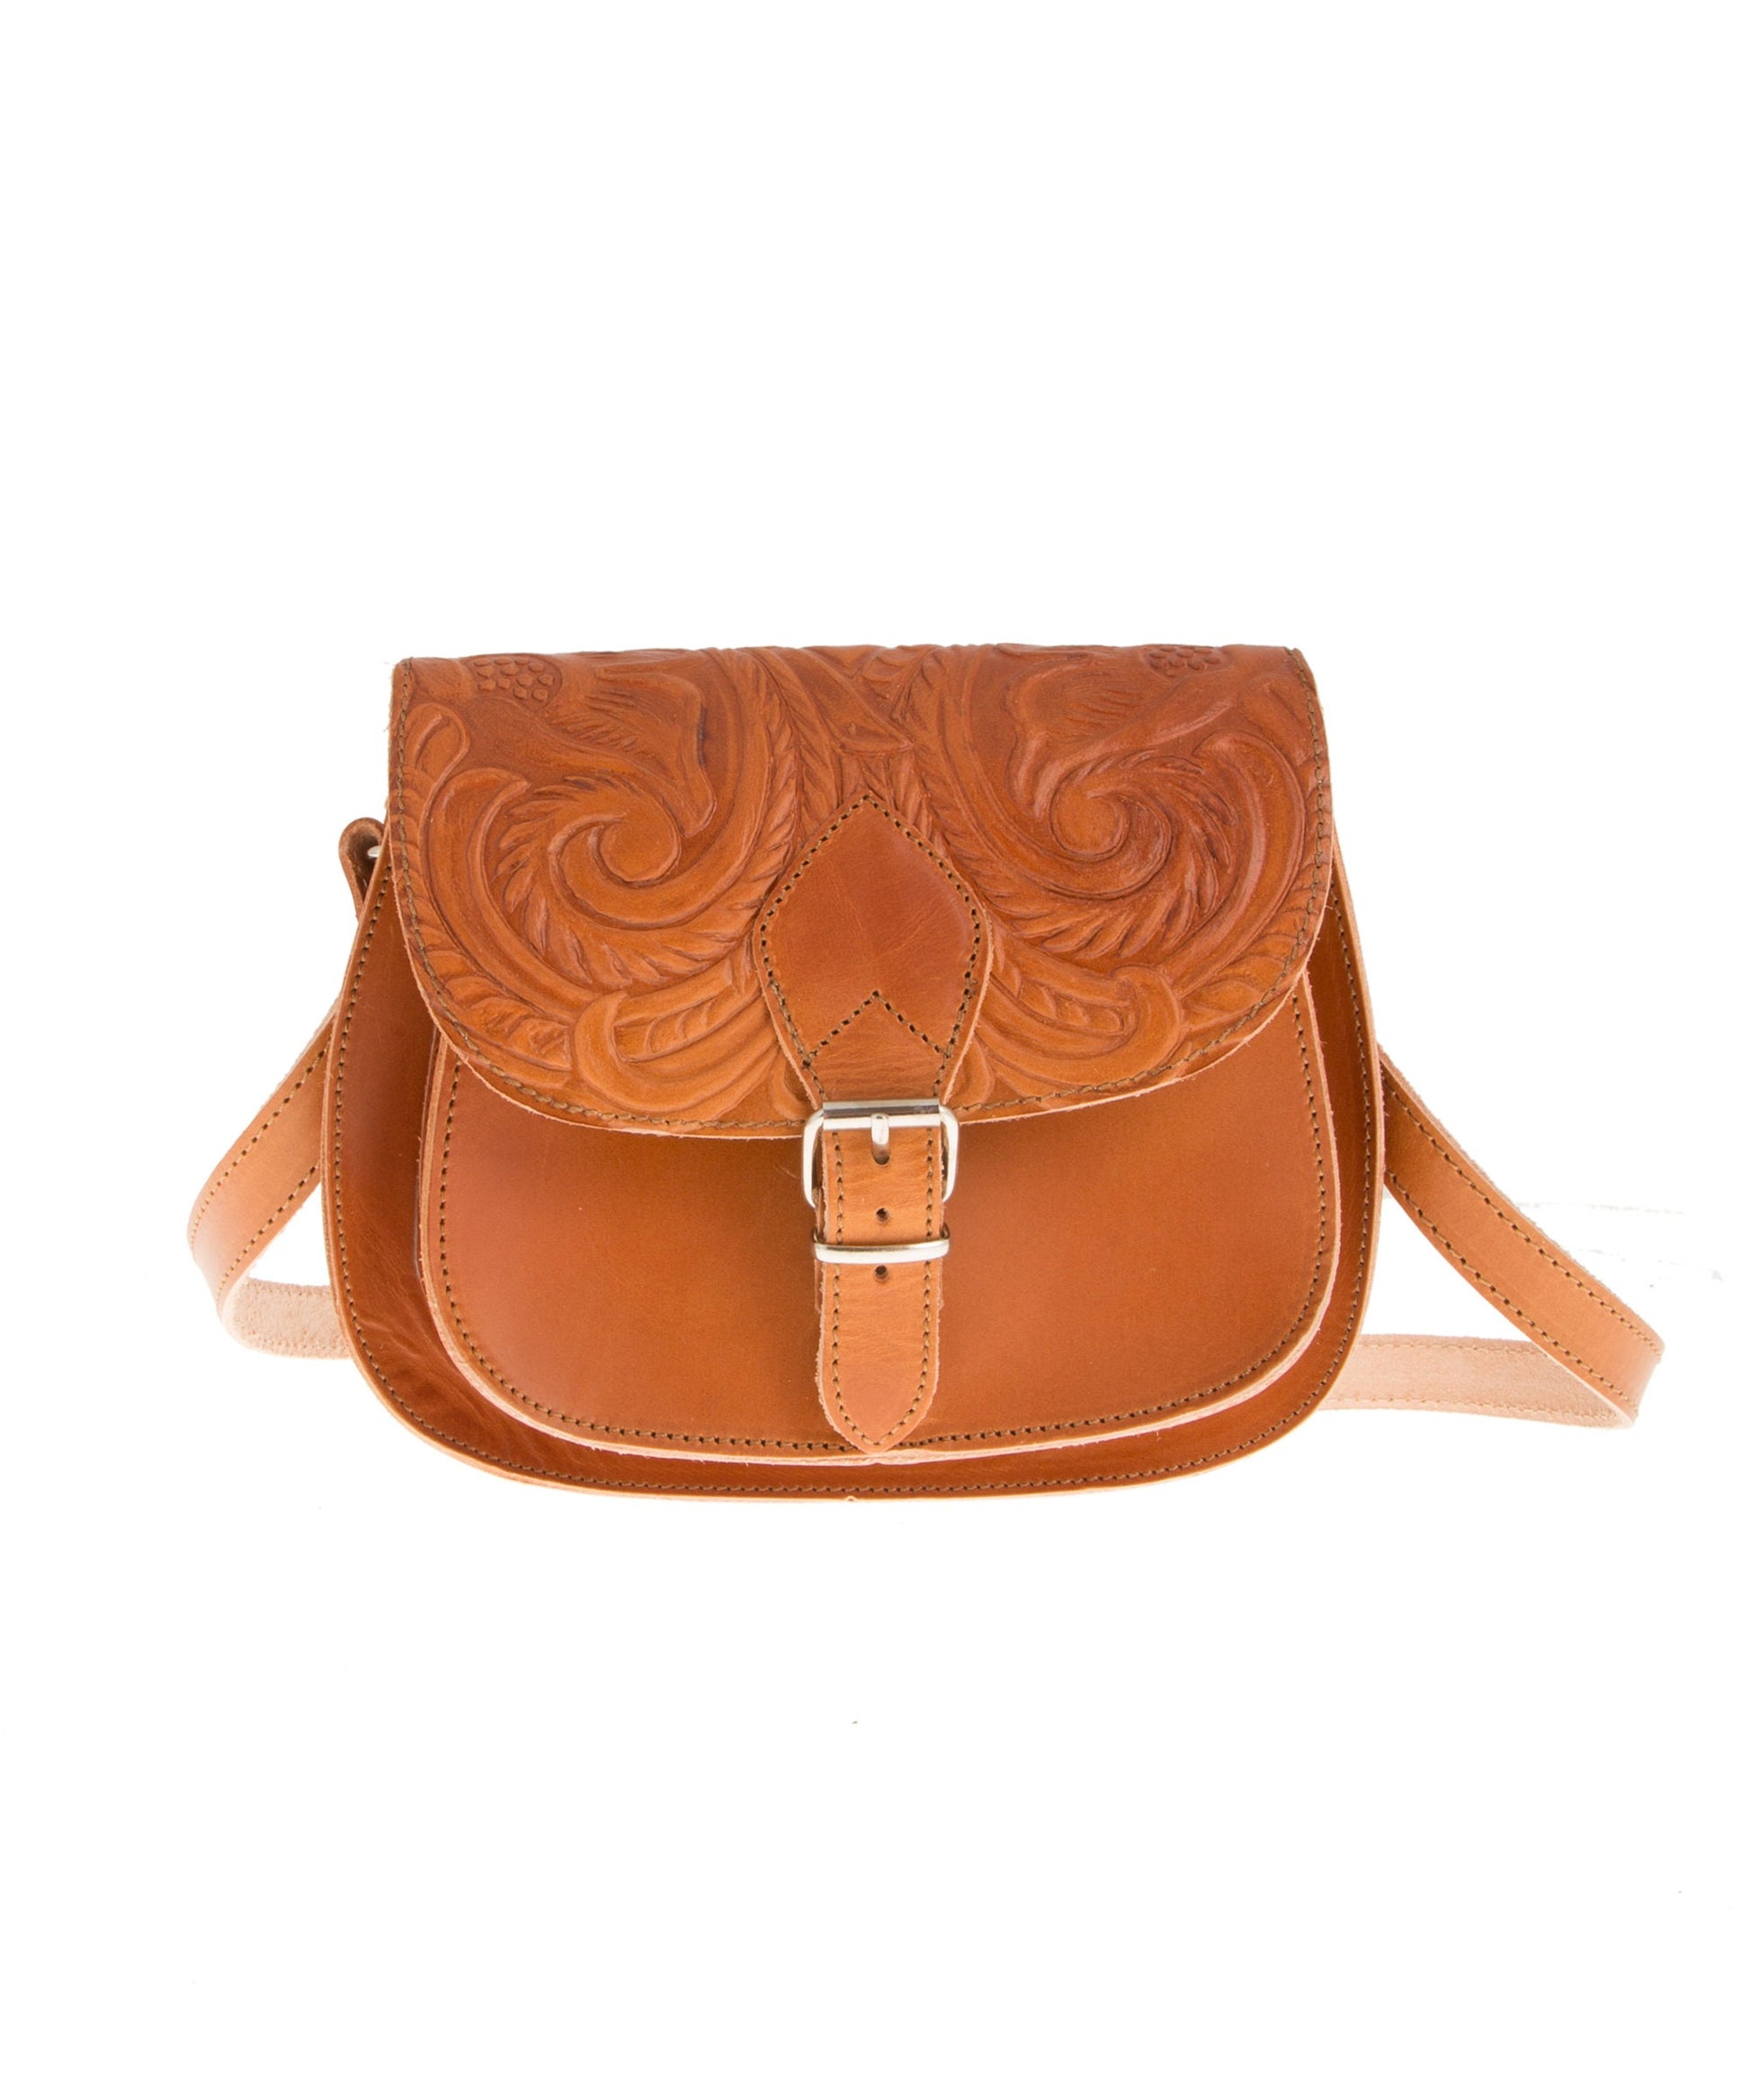 Tooled leather crossbody purse for women, Womens leather saddle bag, Women's leather accessories